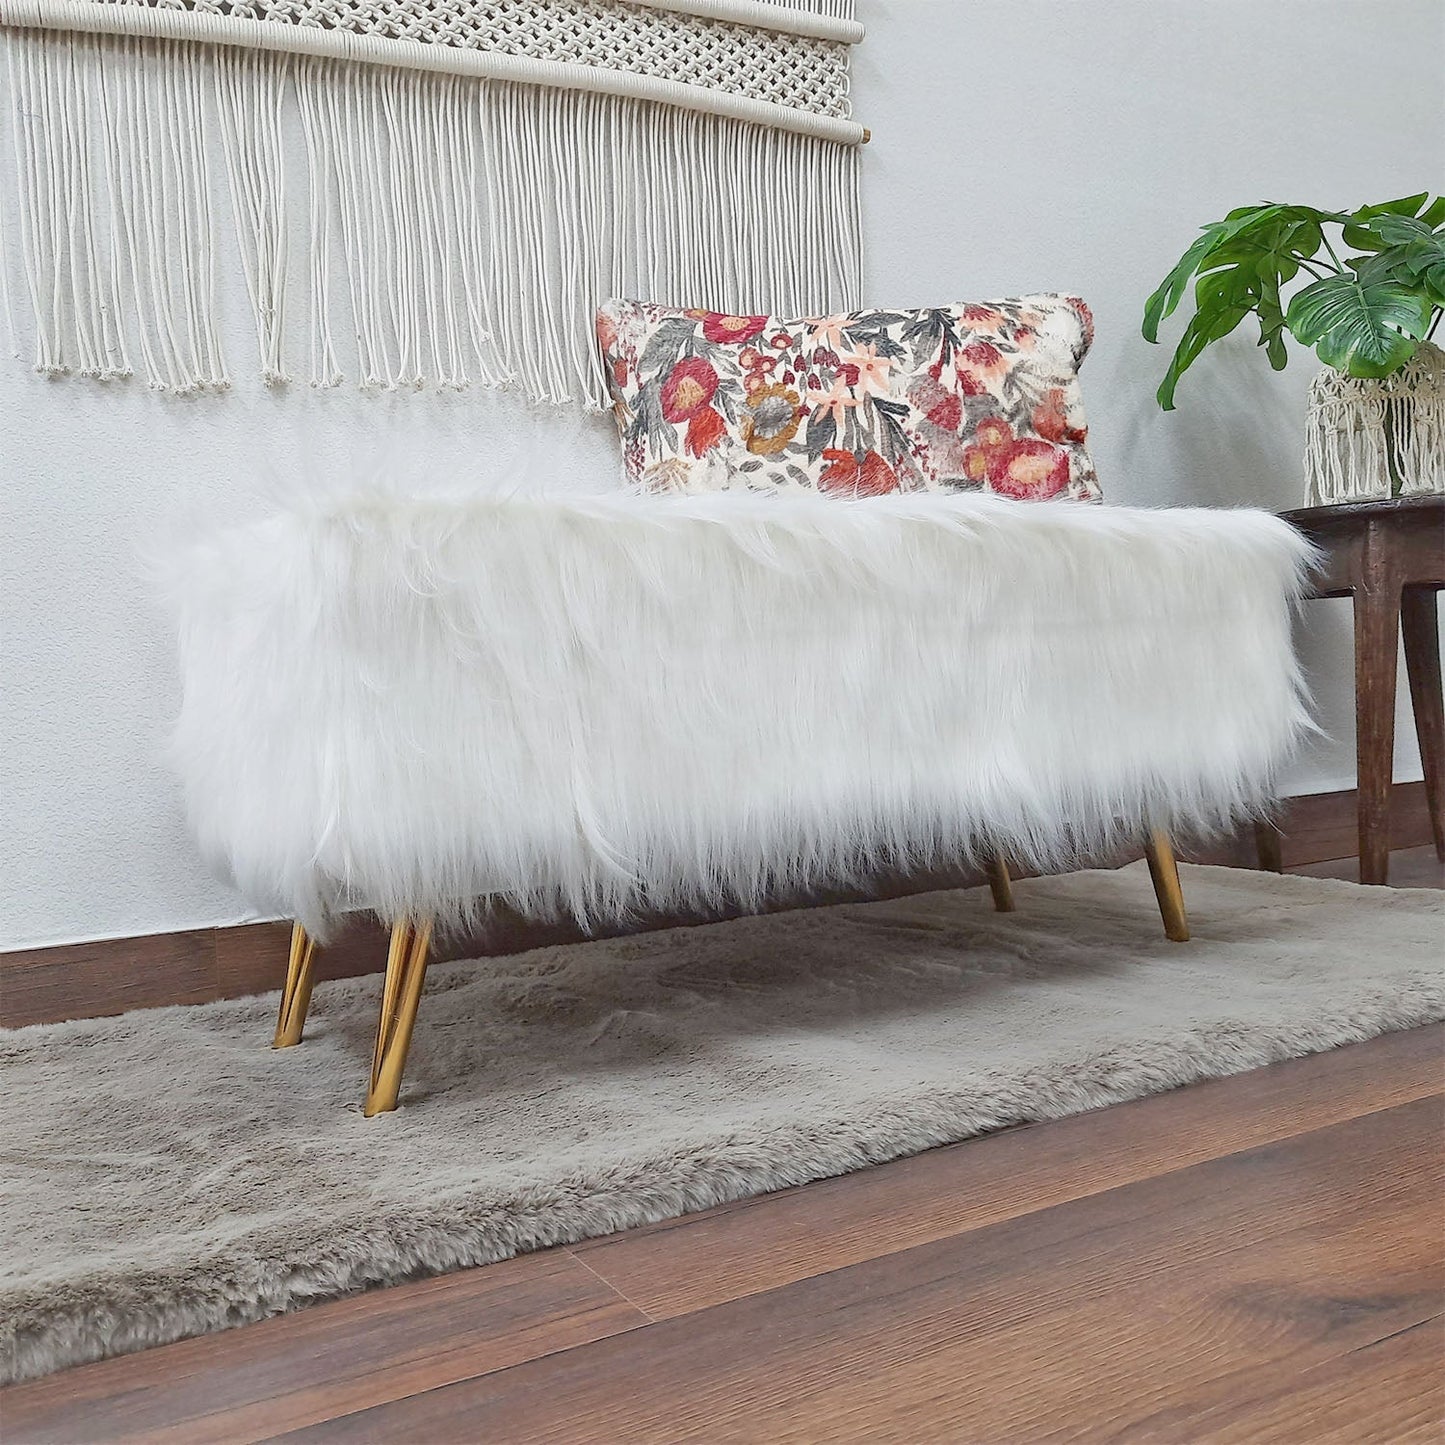 Noviato Collection – White Premium Long Faux Fur Bench Gold Metal Legs Modern On-Trend Style Multi-Functional Ottoman Bench Seat, 90 cm length | from Avioni